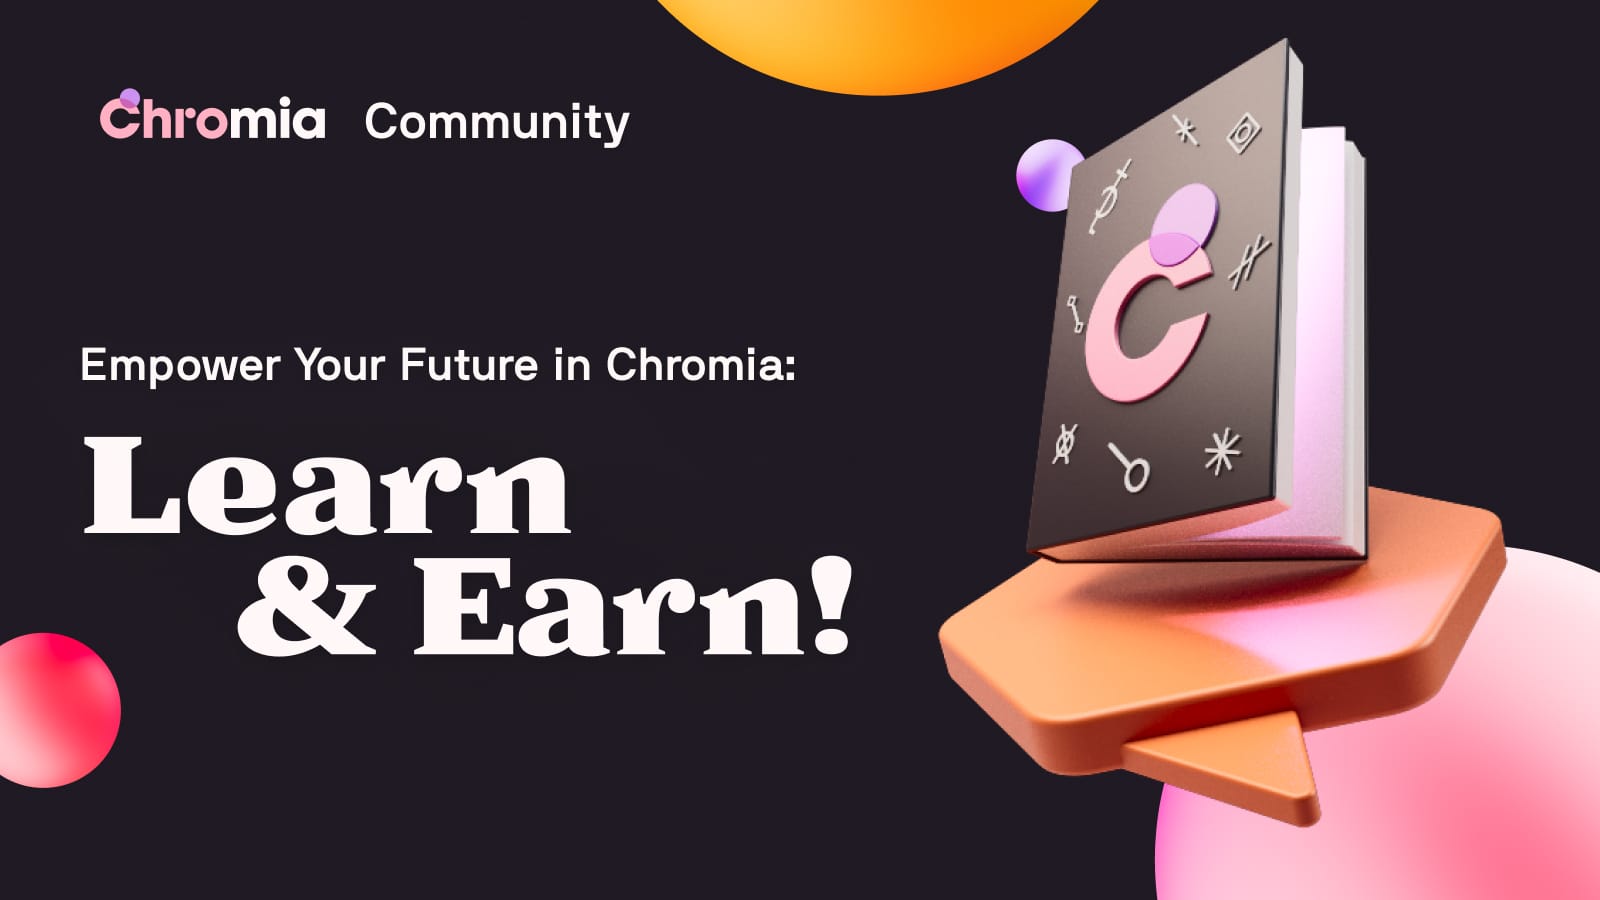 Empower Your Future in Chromia: Learn & Earn!